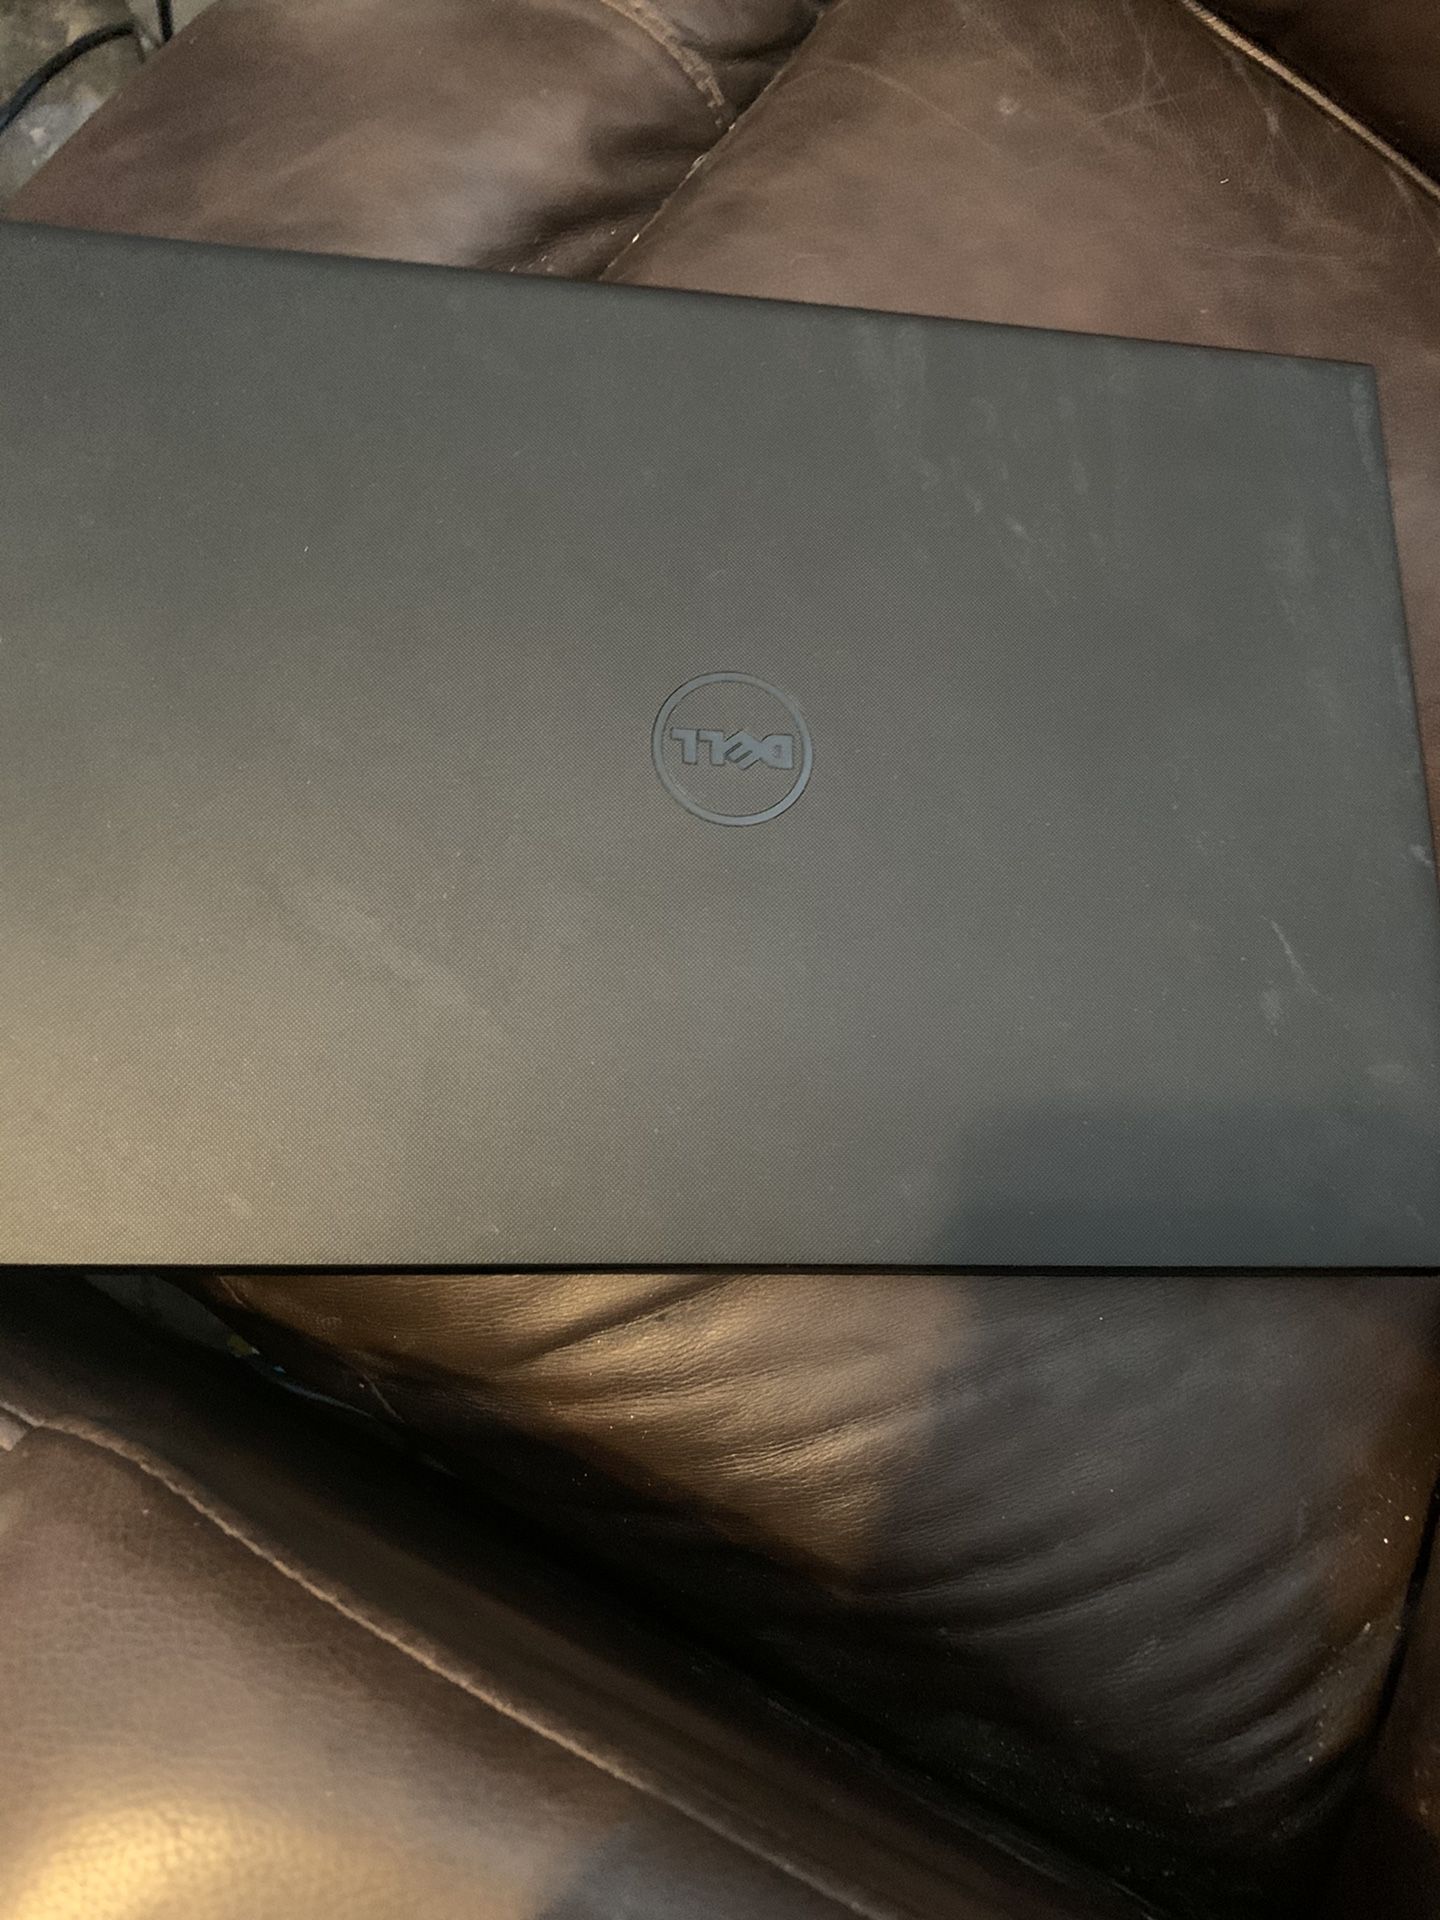 Dell Inspiron 3000 series laptop